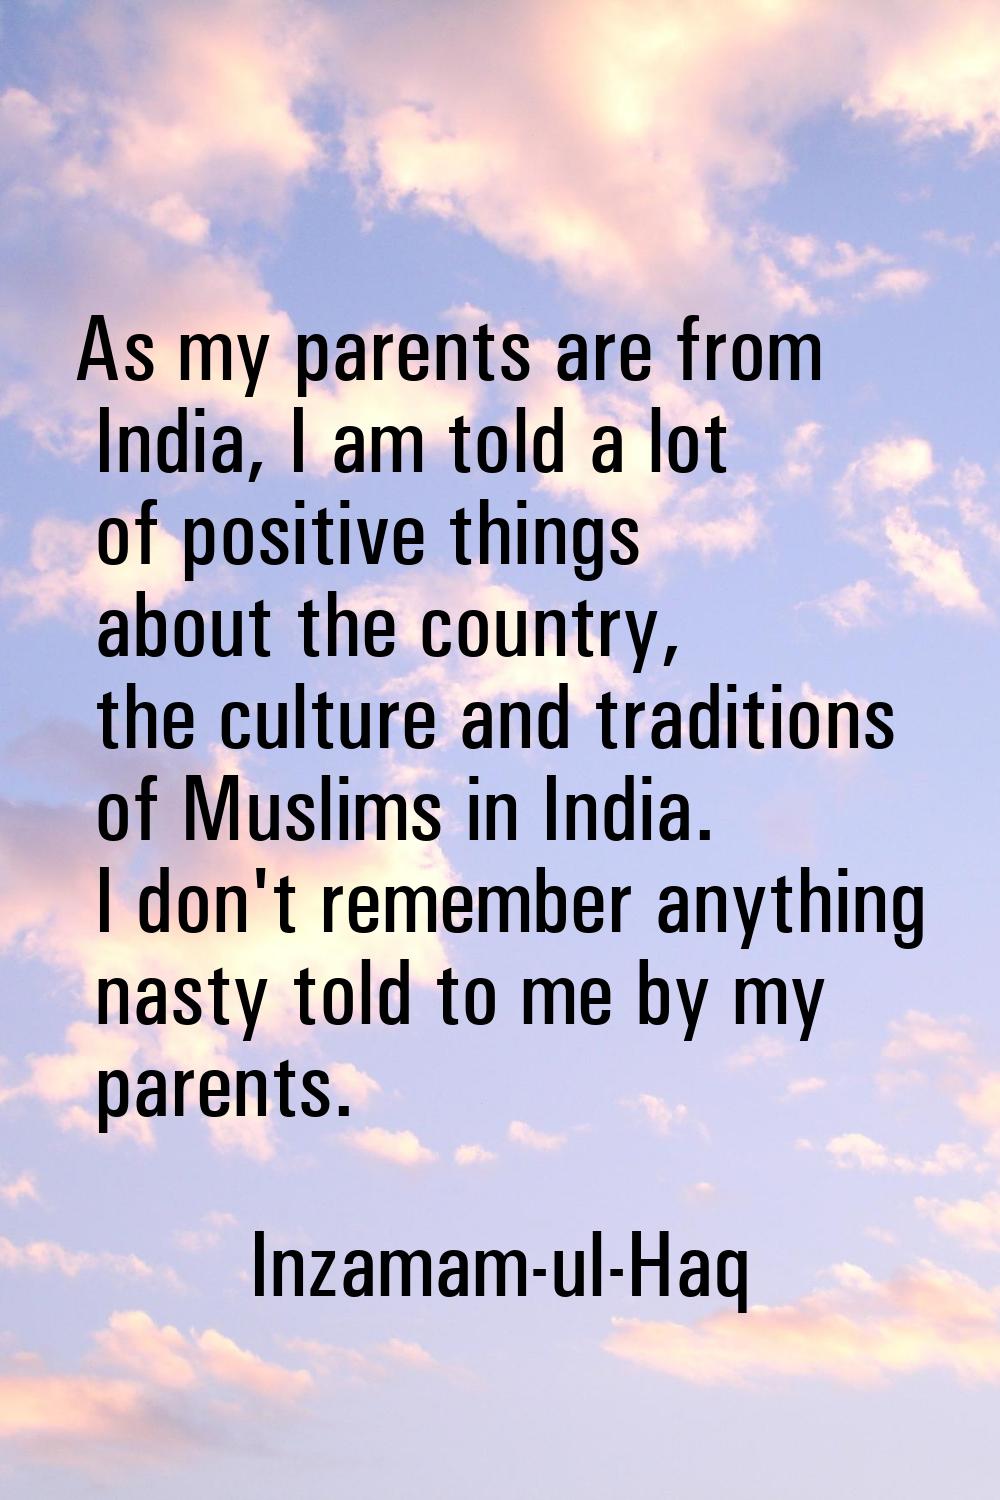 As my parents are from India, I am told a lot of positive things about the country, the culture and